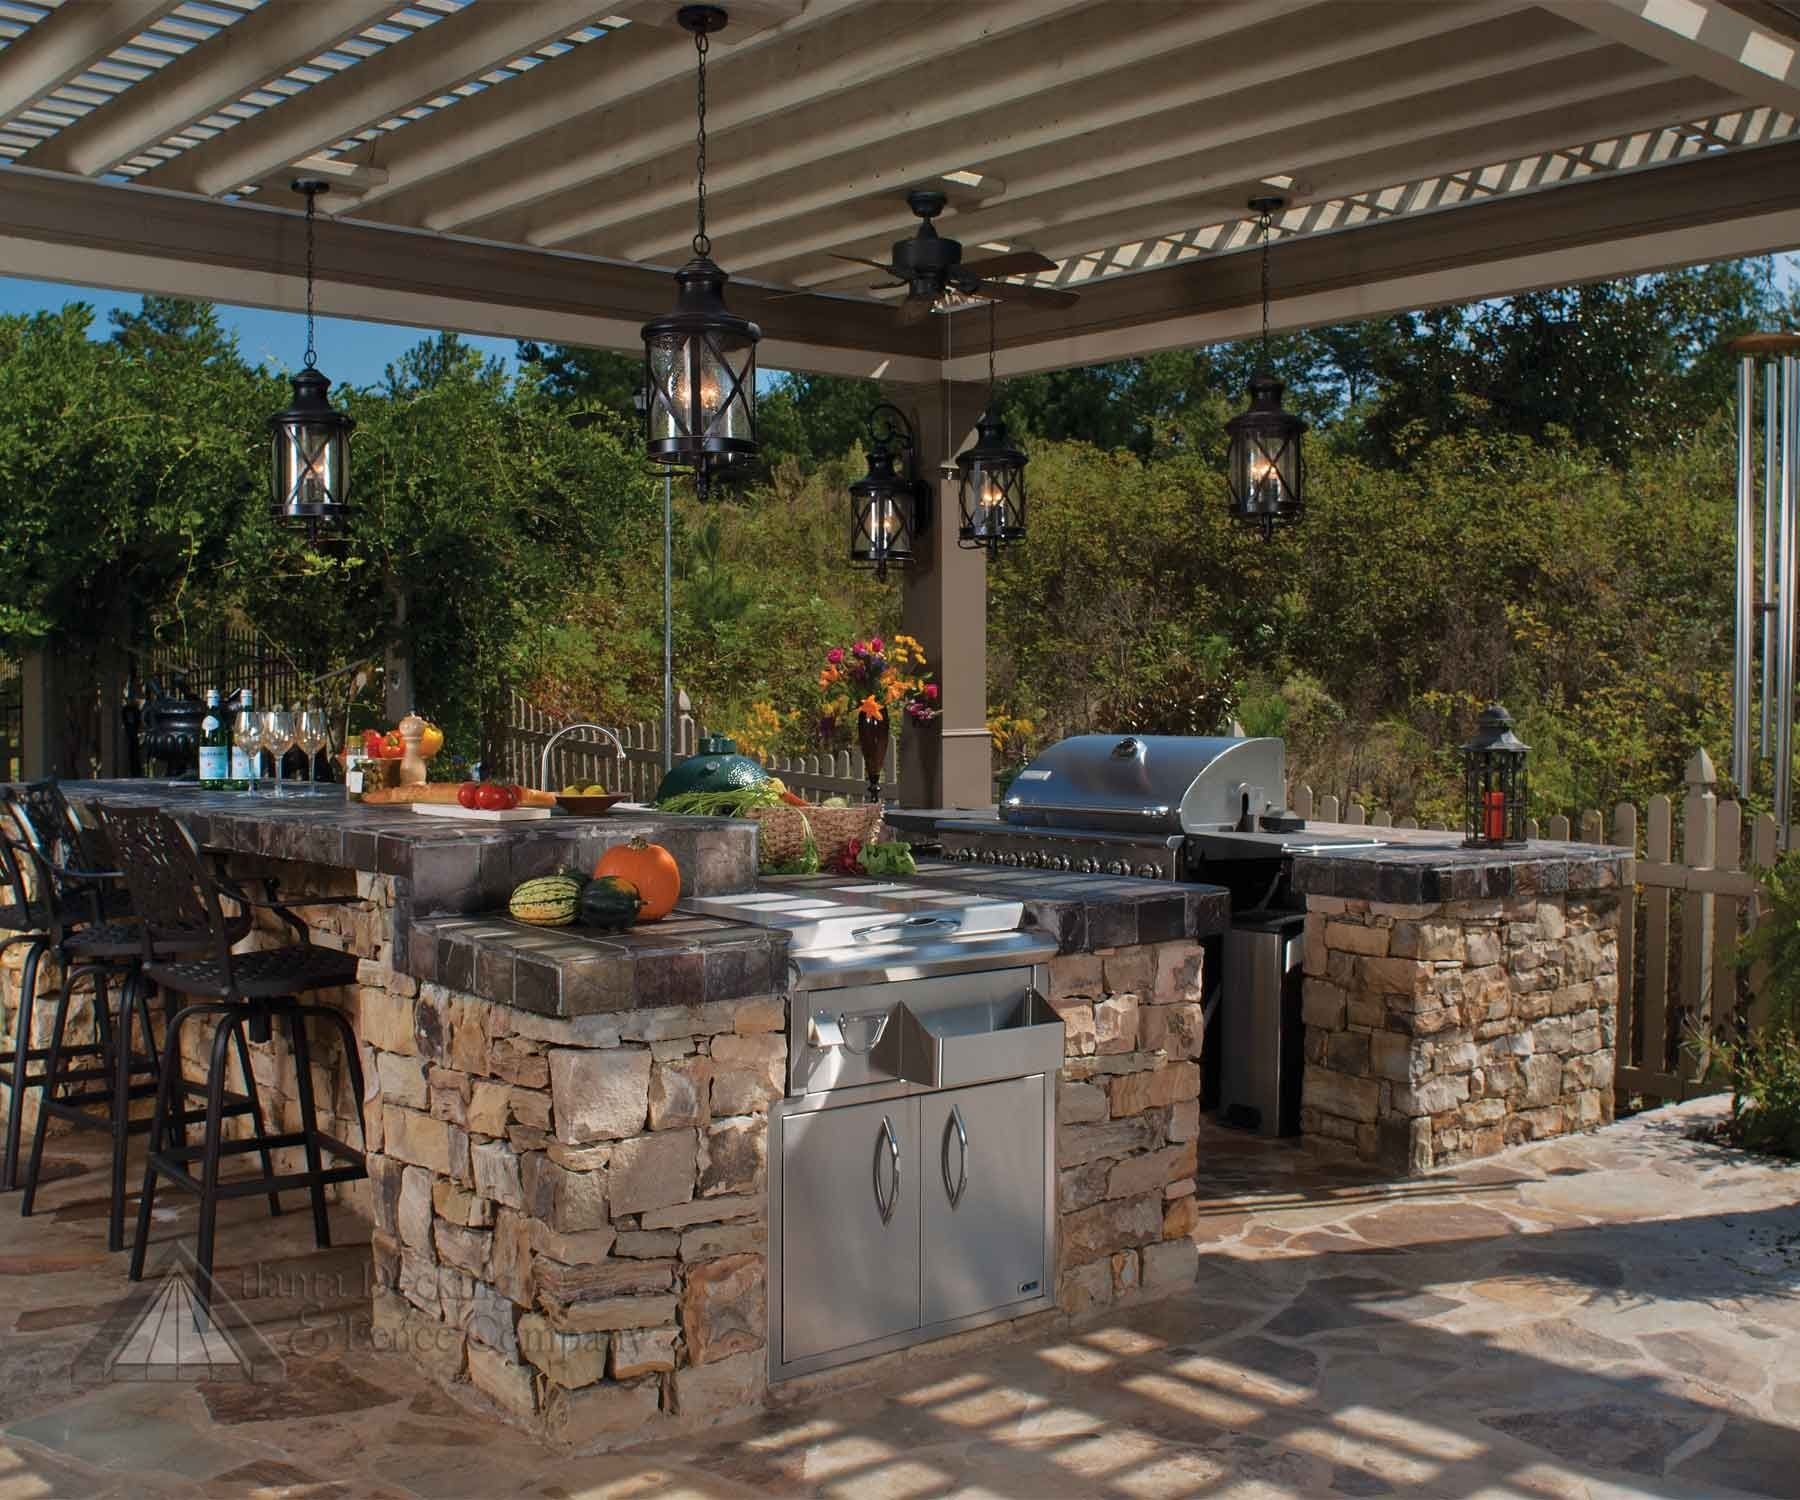 Lantern Shaped Hanging Outdoor Pendant Lights In An Outdoor Kitchen Within Outdoor Hanging Bar Lights (View 4 of 15)